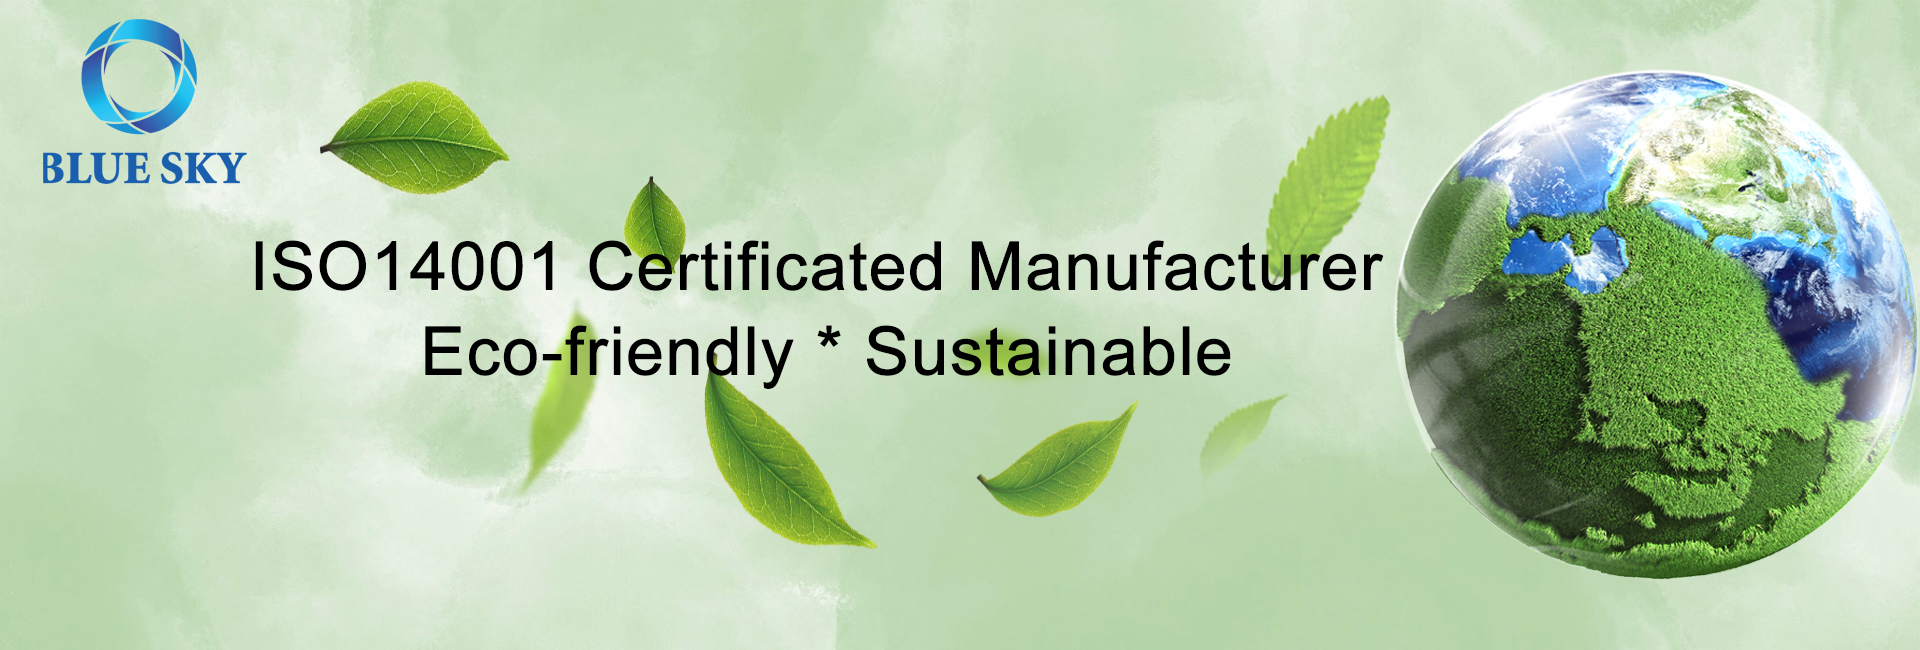 ISO14001 Certificated Manufacturer Eco-friendly Sustainable